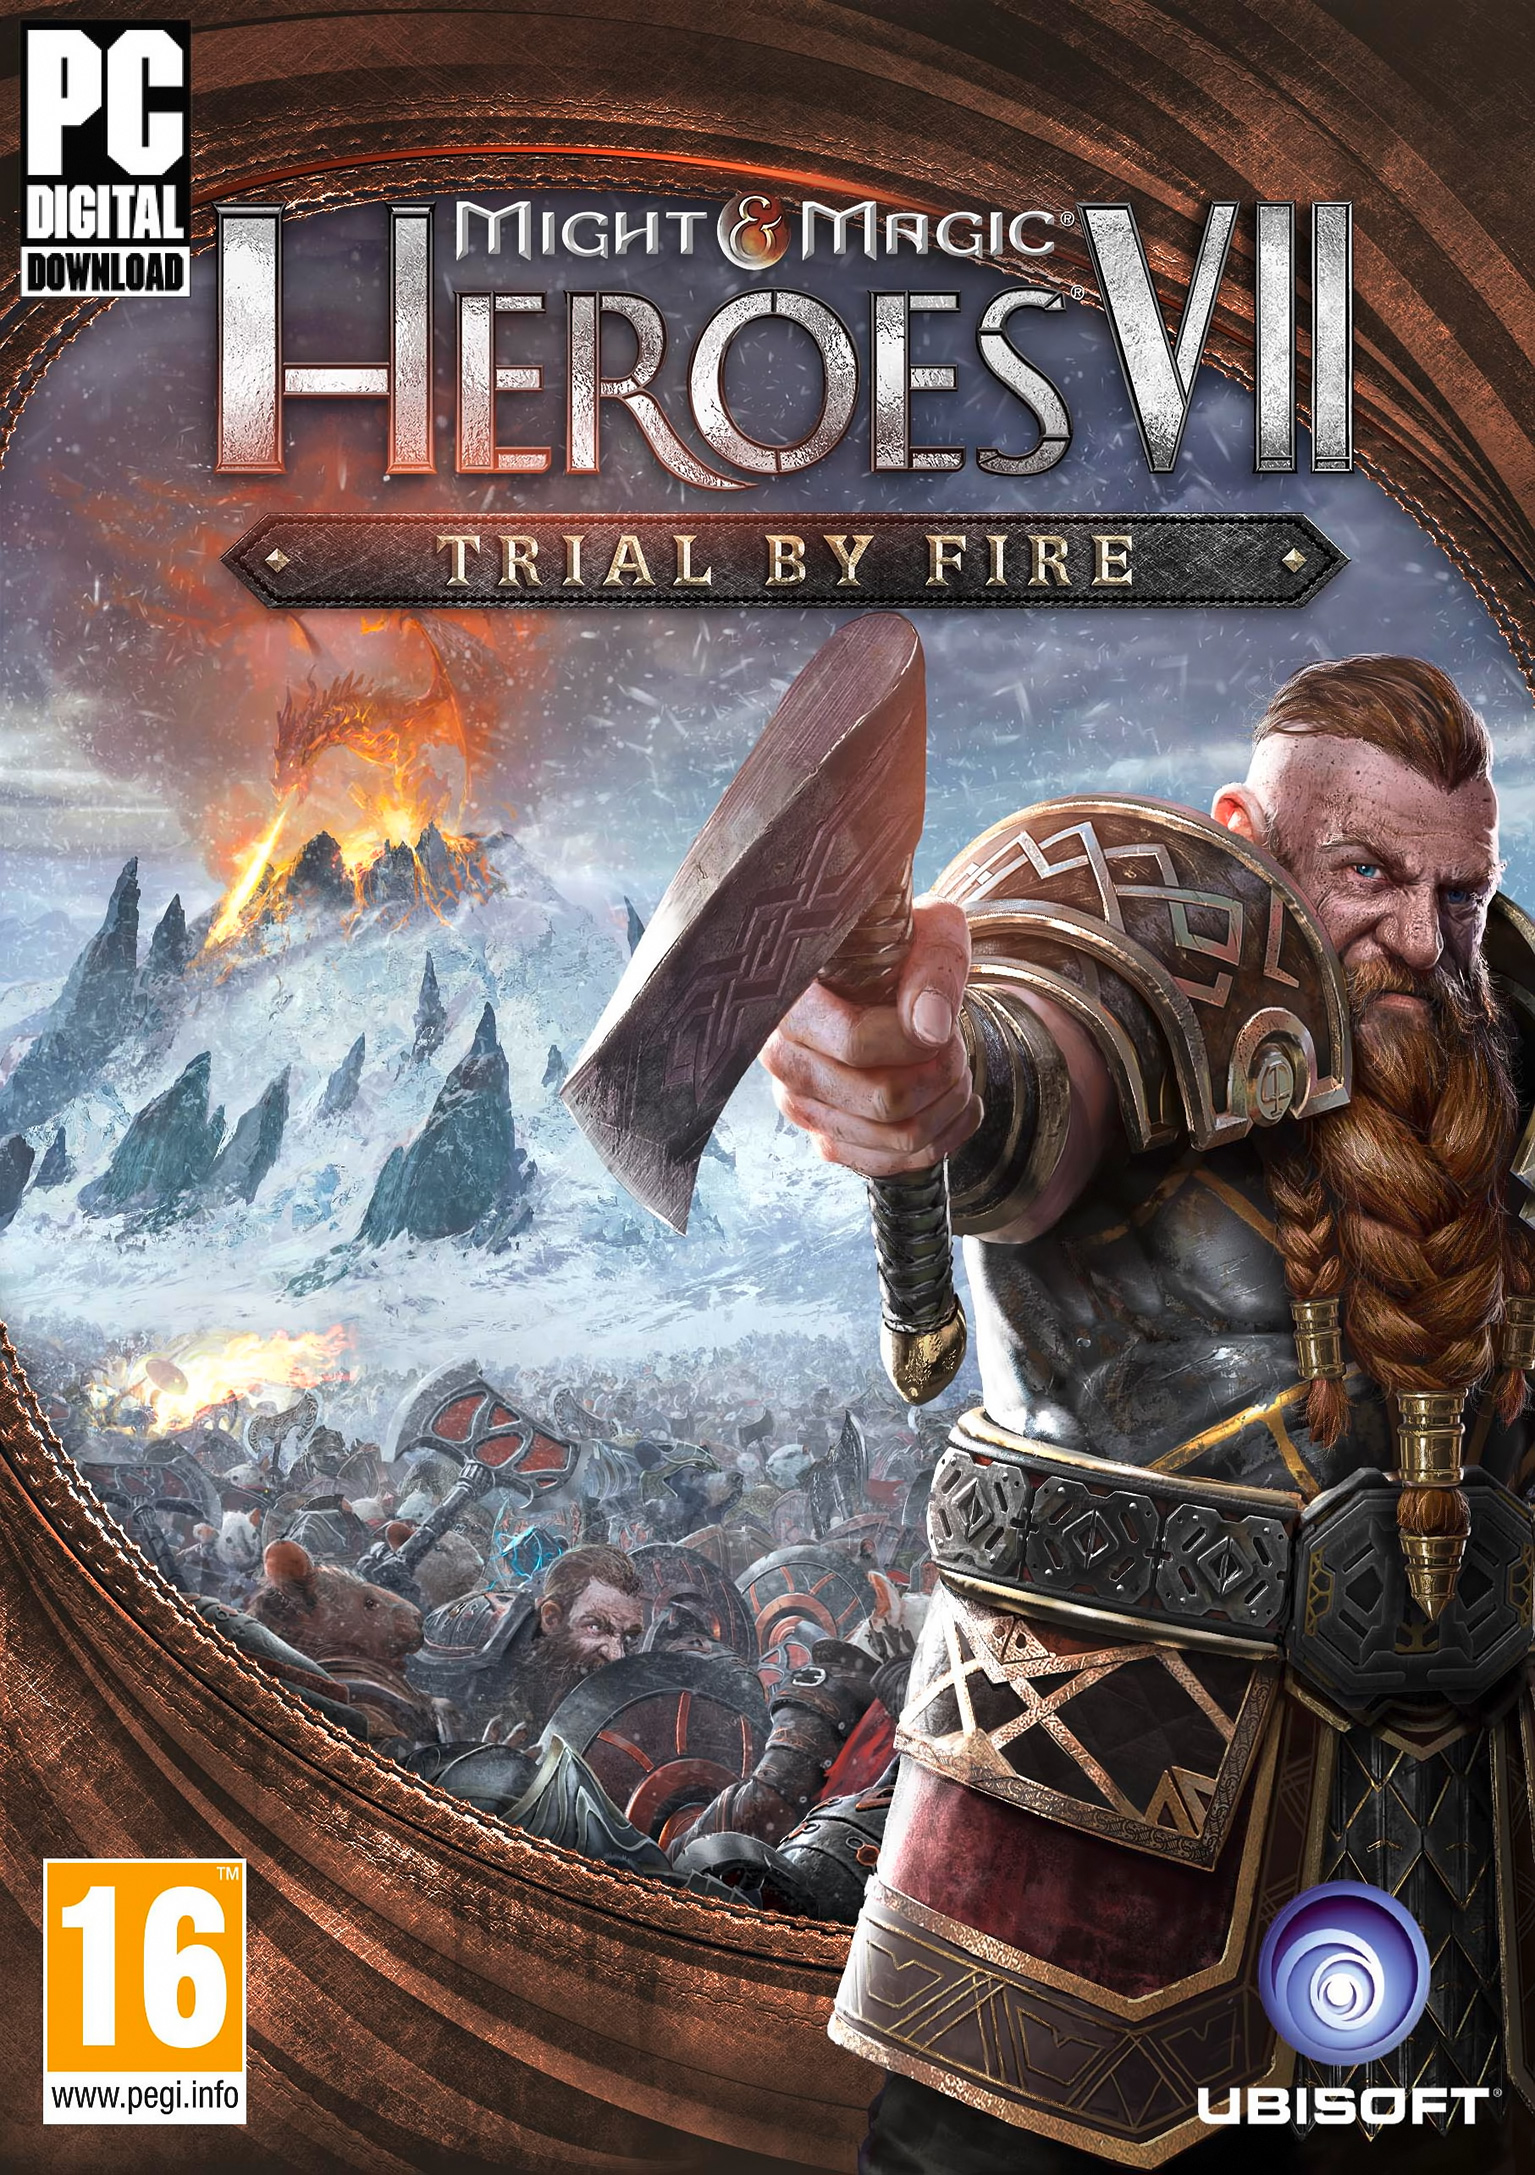 Might & Magic Heroes VII - Trial by Fire - pedn DVD obal